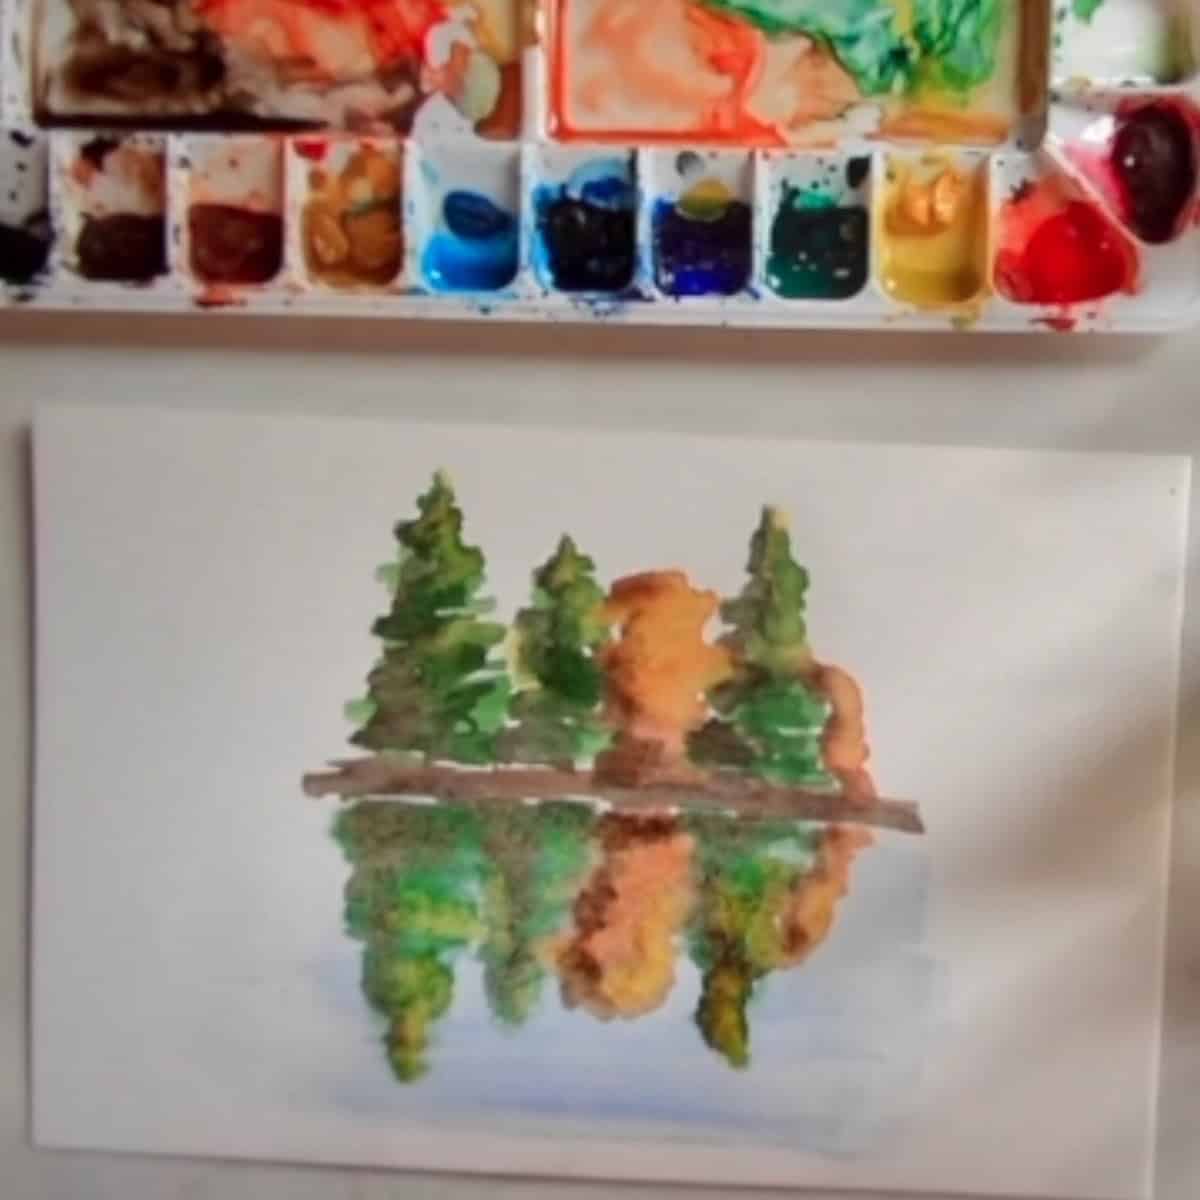 The completed painting of trees reflected on the water is displayed on a white table next to a watercolor paint set.